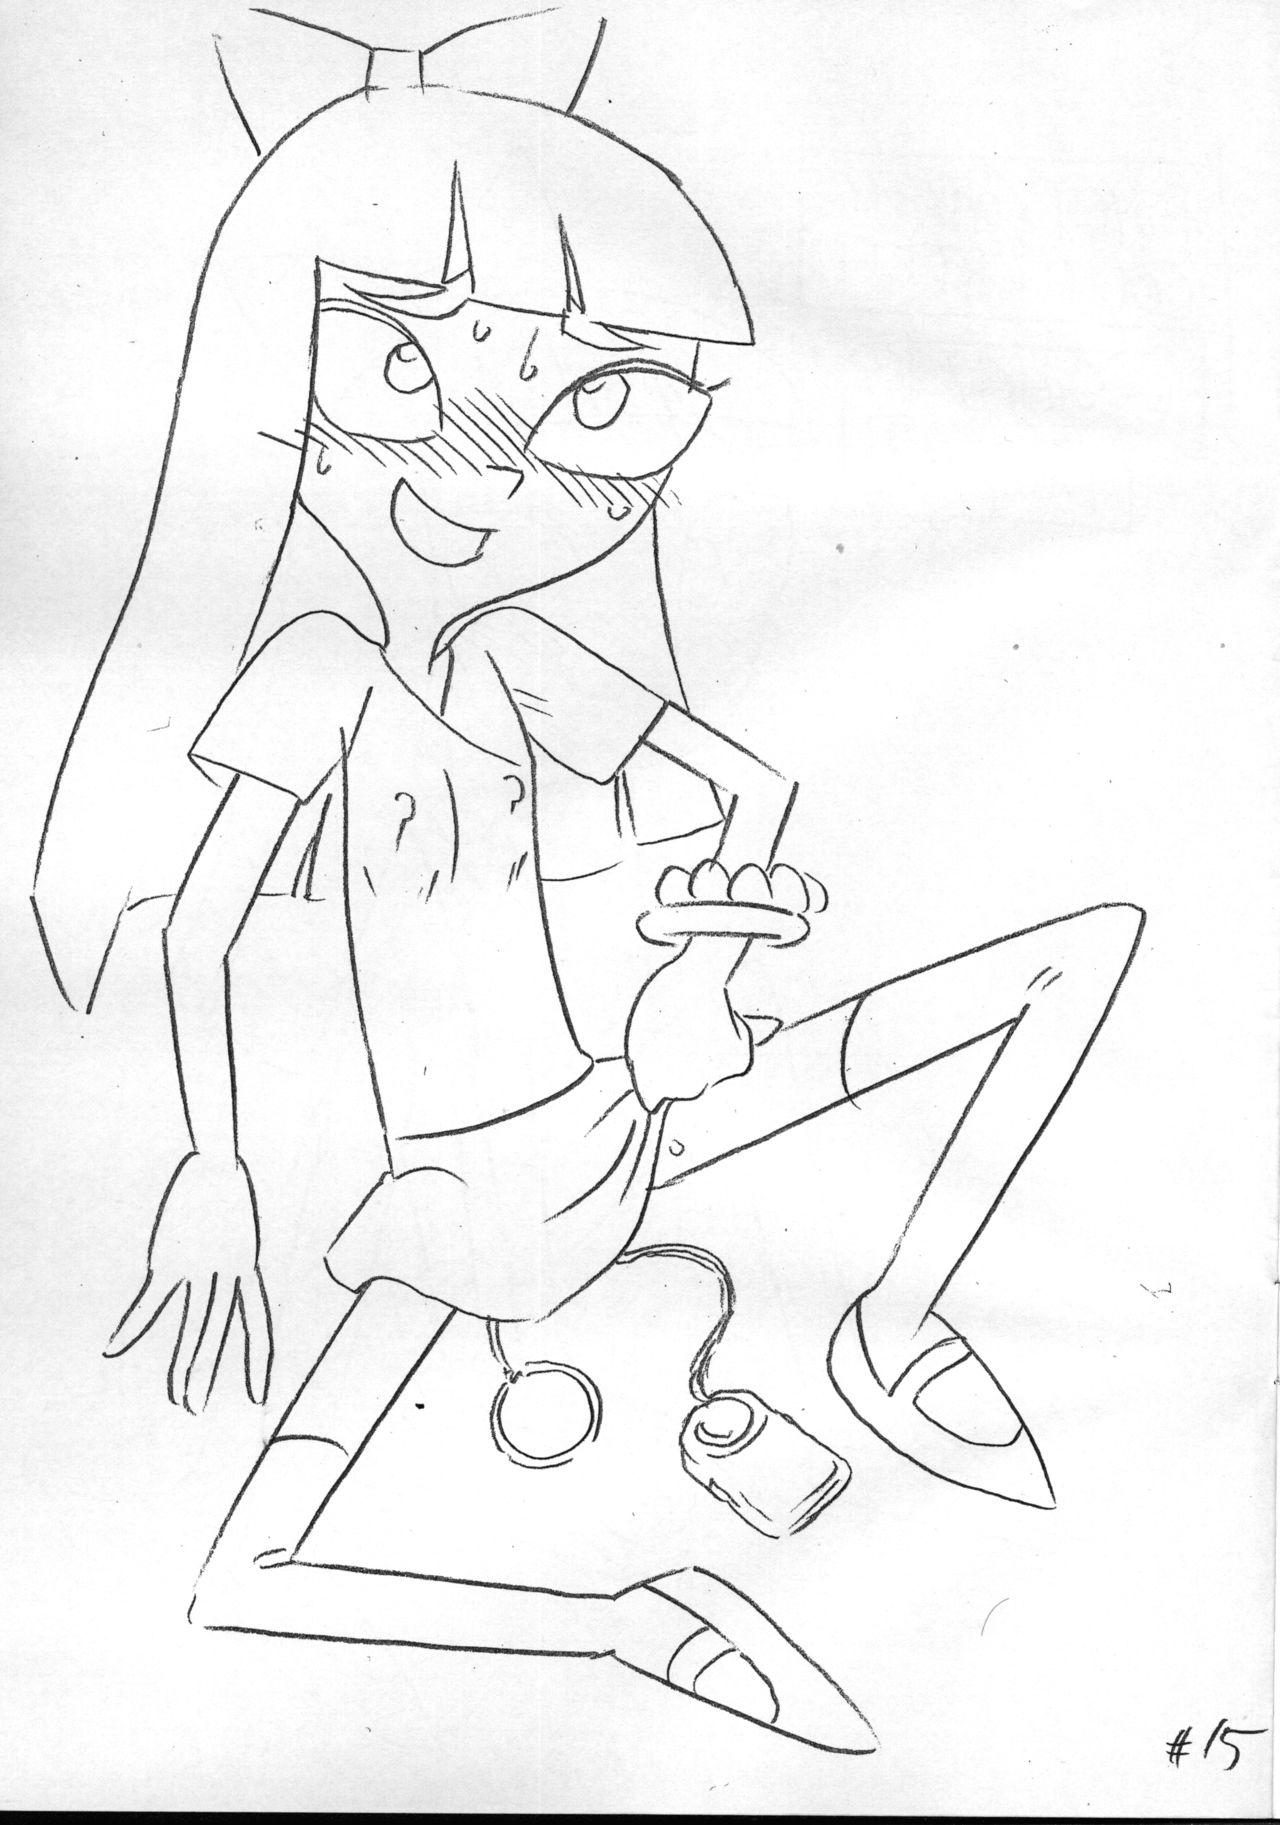 Rough Sex Psychosomatic Counterfeit Ex: Stacy in Early Age - Phineas and ferb Stunning - Page 14